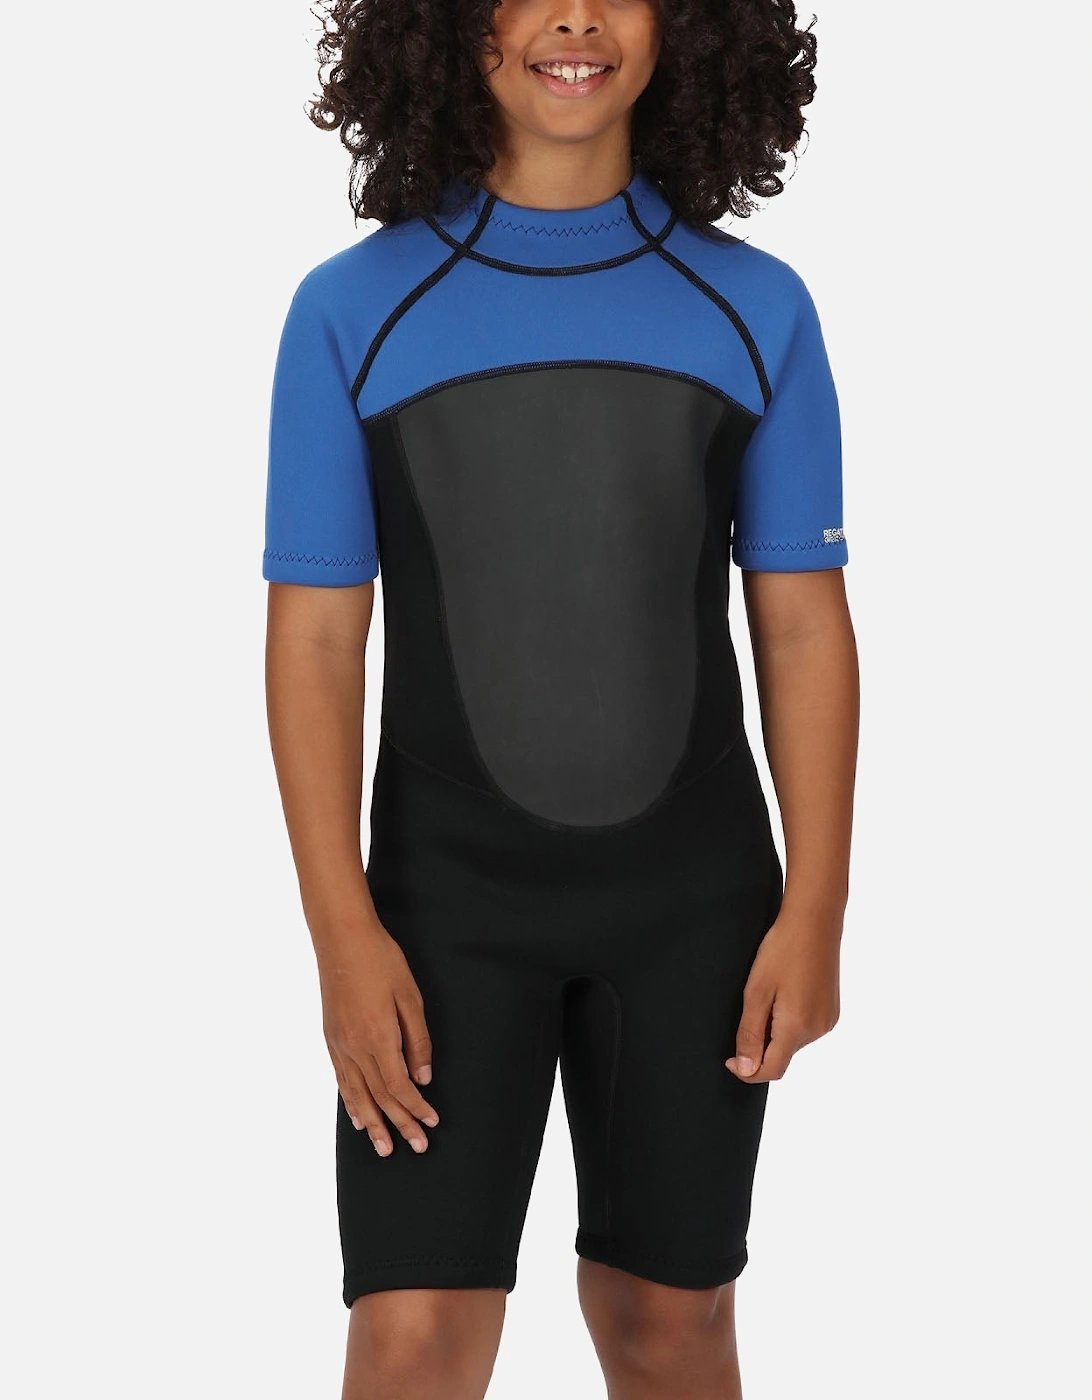 Kids Shorty Surfing Wetsuit